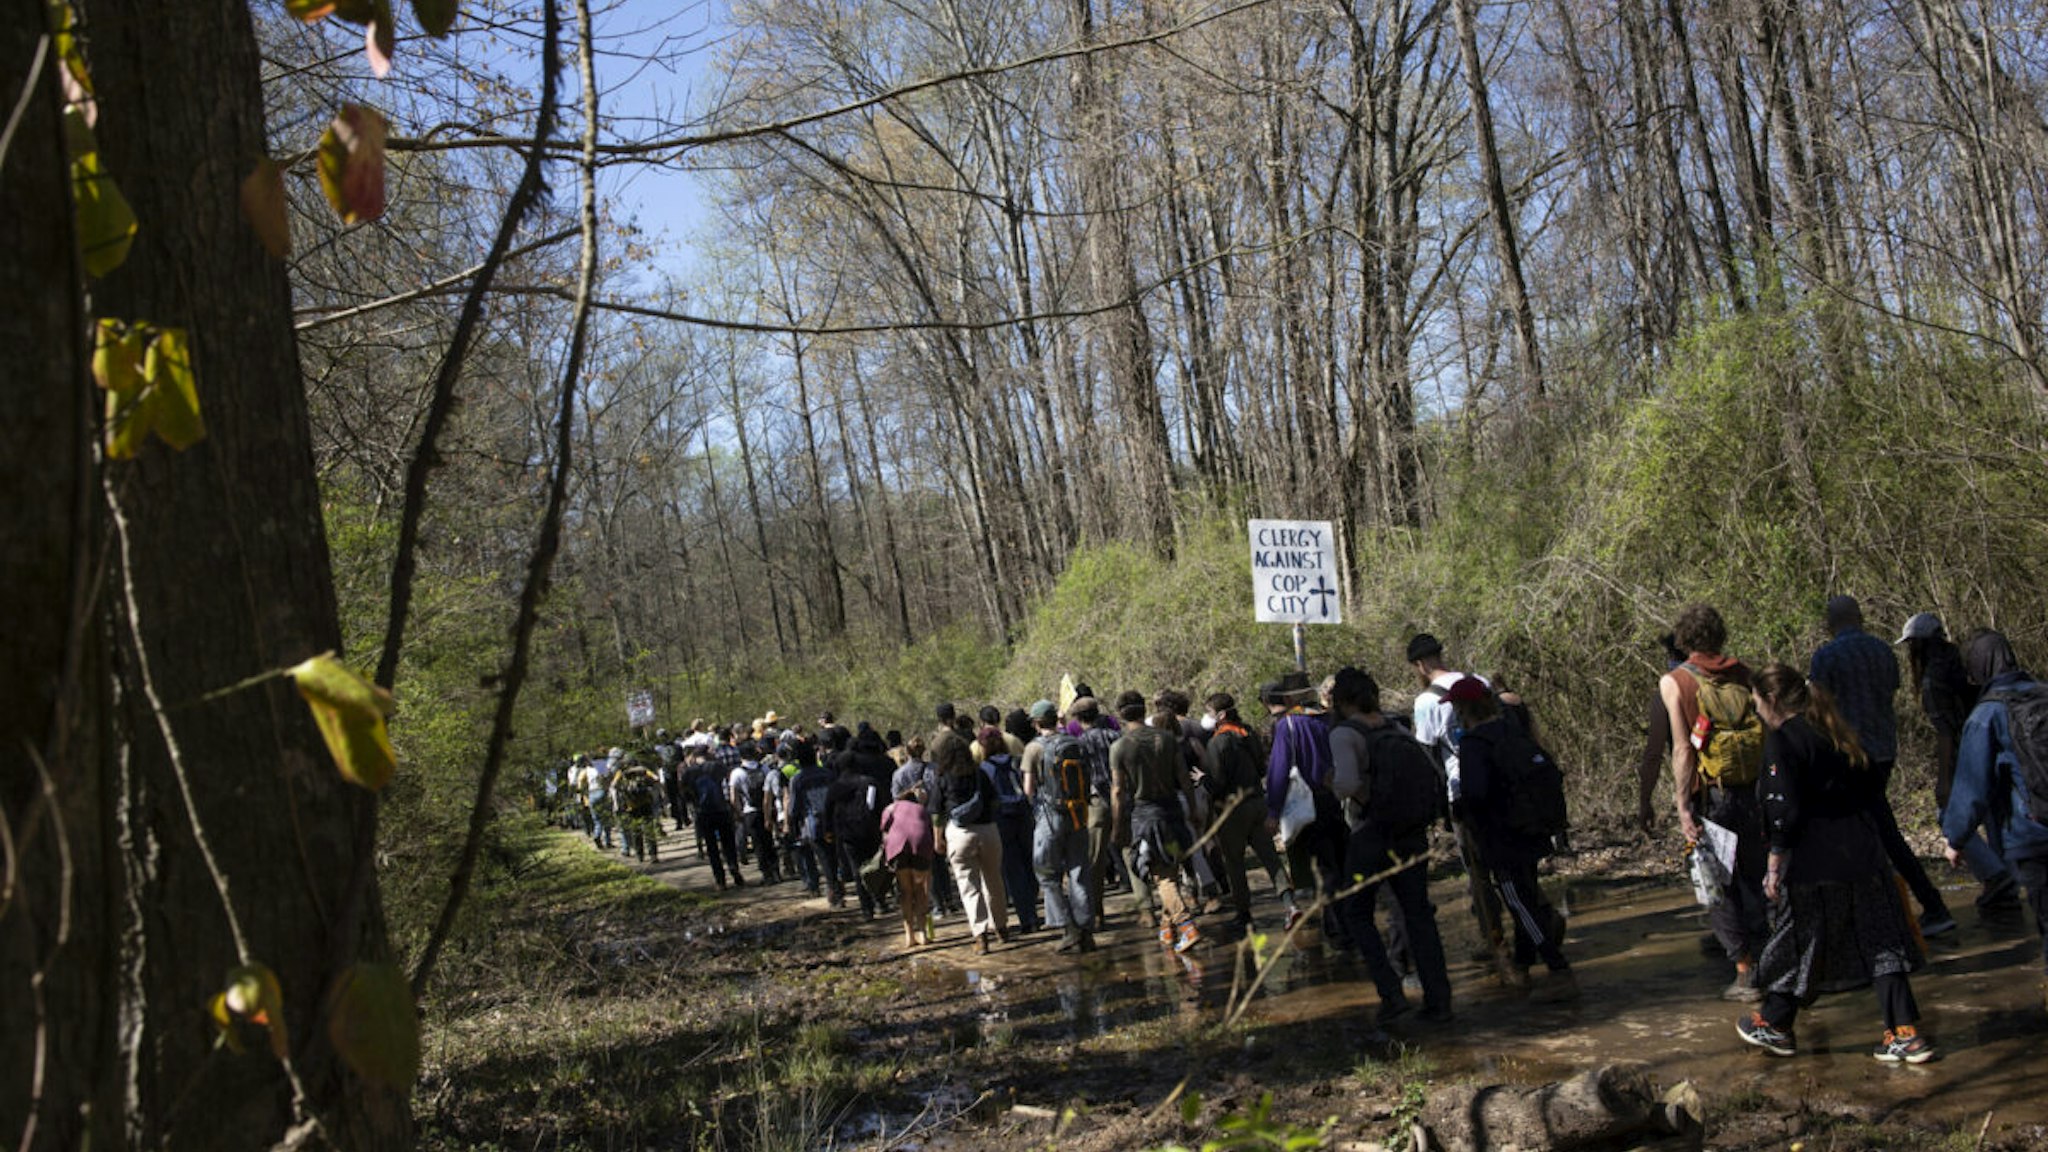 Environmental activists hold a rally and a march through the Atlanta Forest, a preserved forest Atlanta that is scheduled to be developed as a police training center, March 4, 2023 in Atlanta, Georgia.